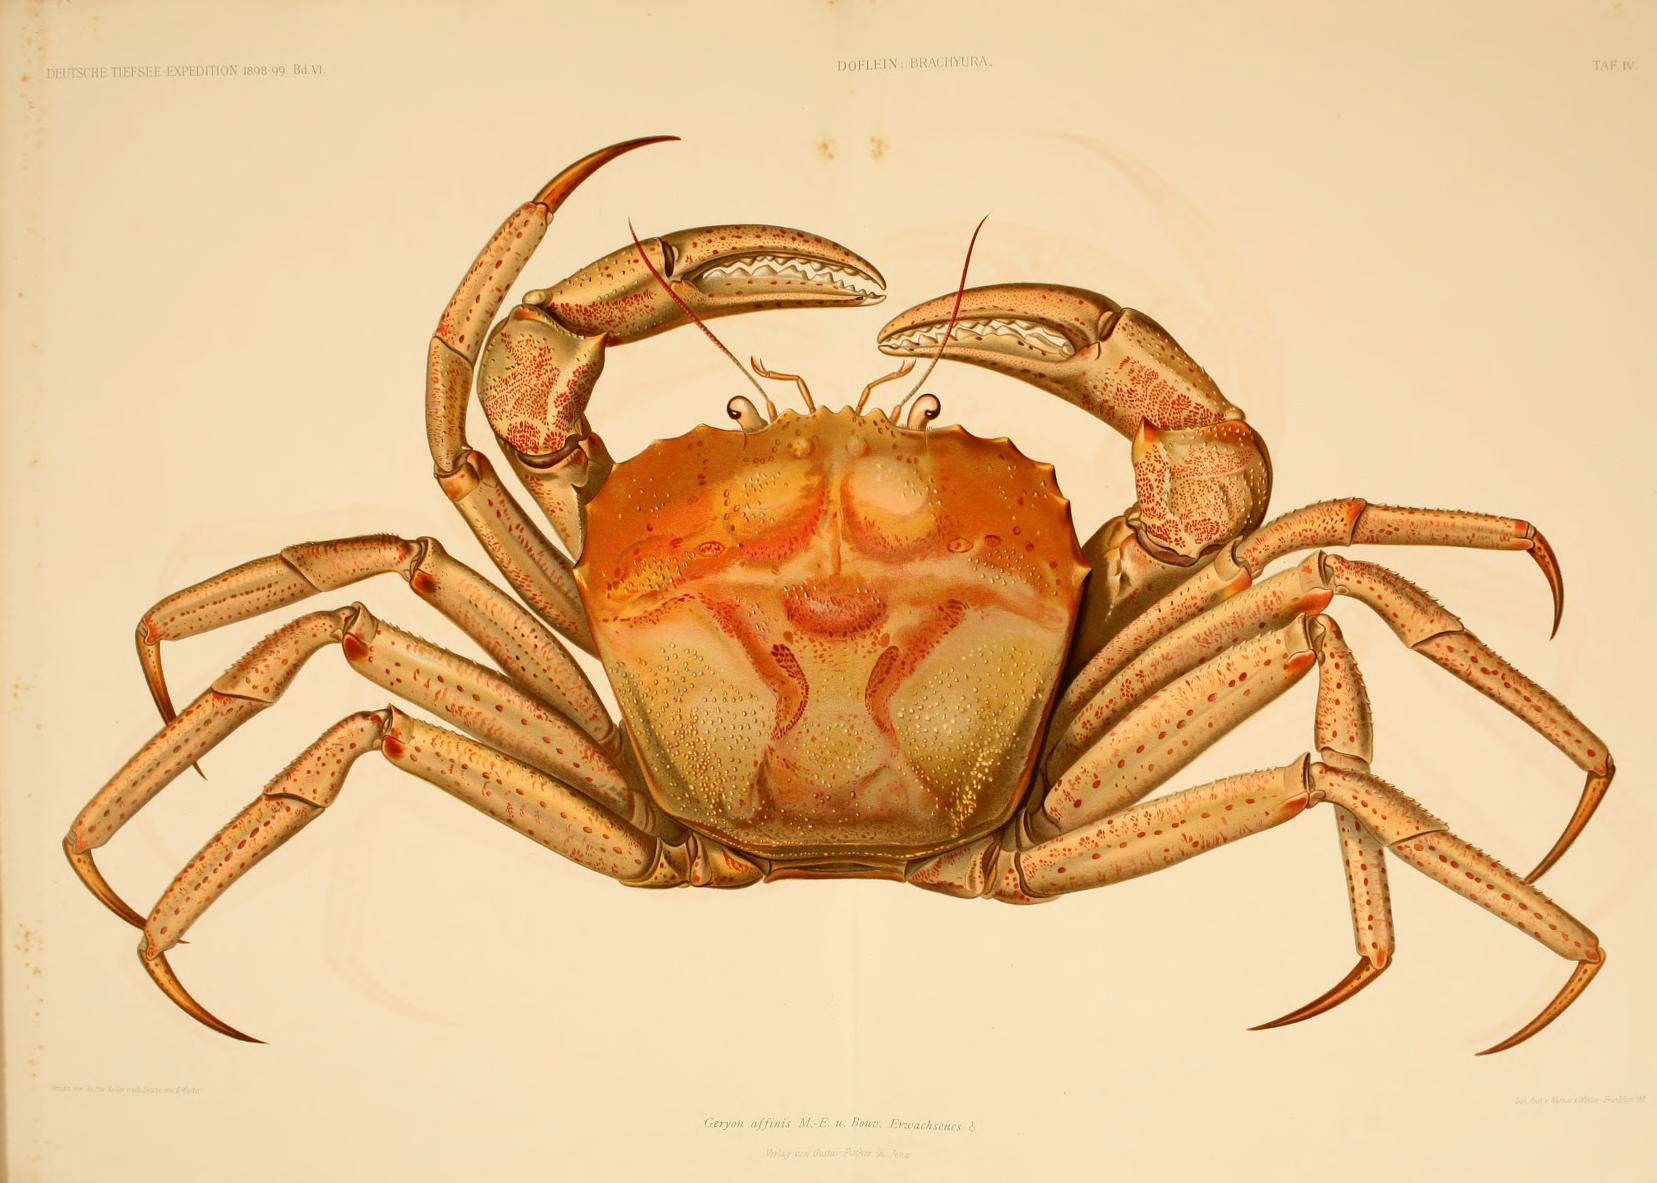 a crab with an odd, very large body